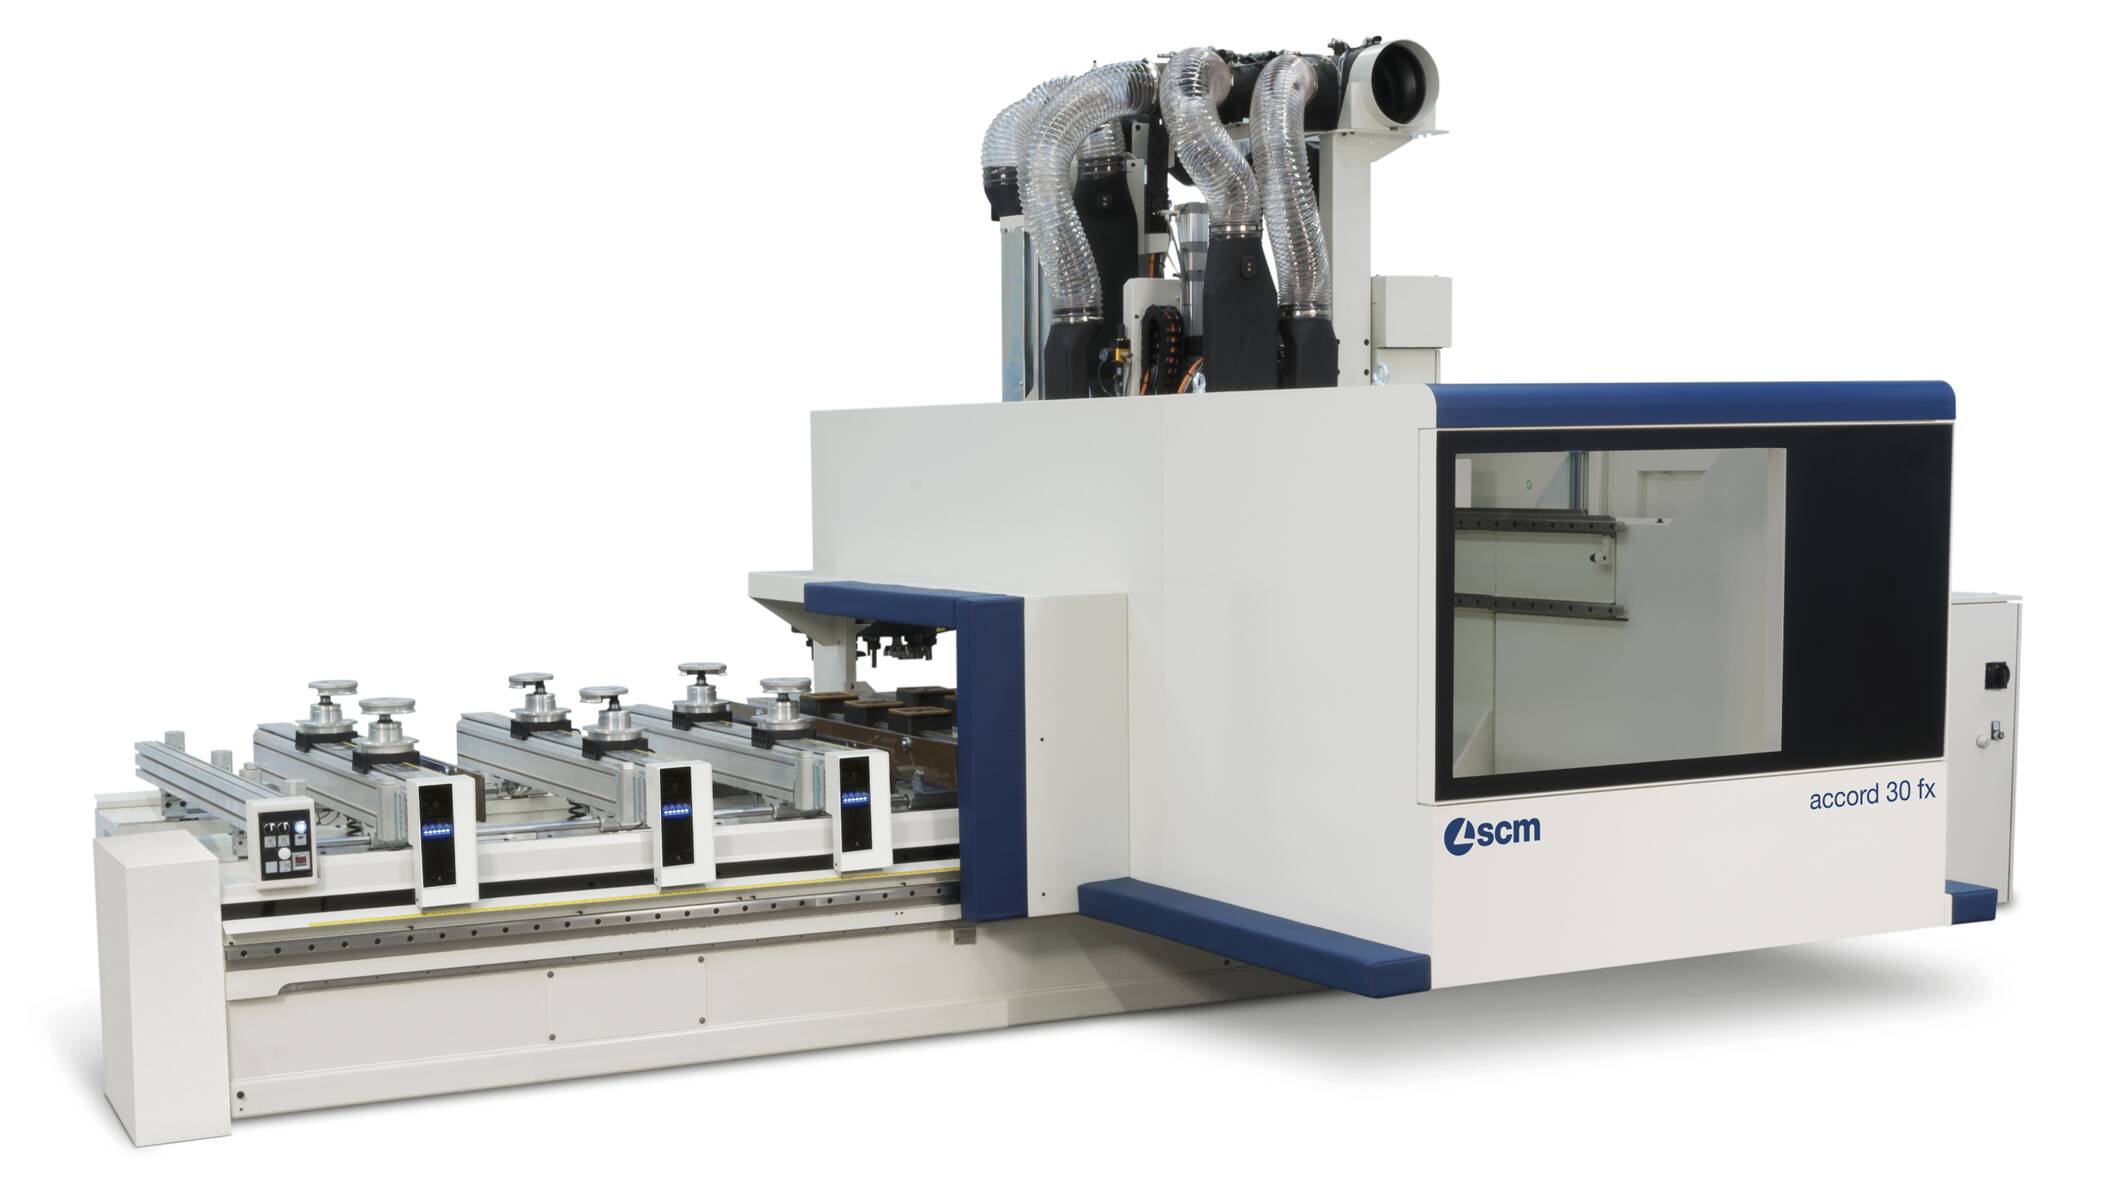 CNC Machining Centers - CNC Machining Centers for routing and drilling - accord 30 fx